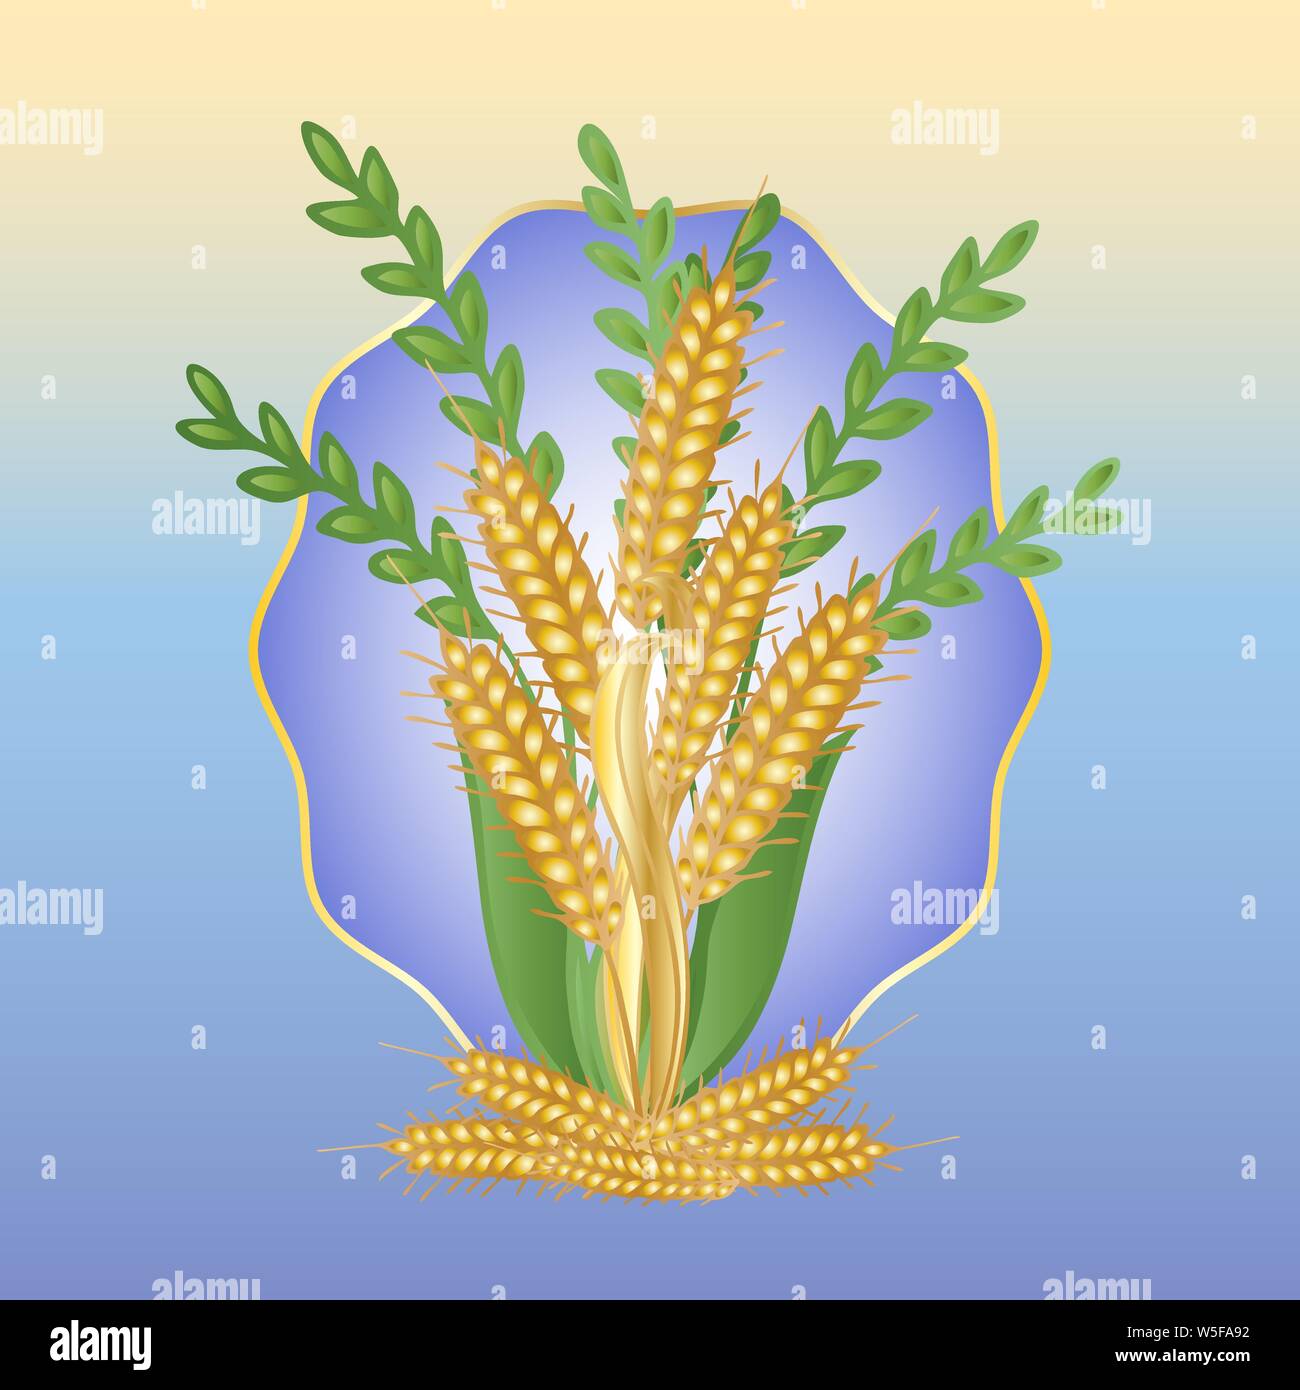 Bouquet of ears of wheat and grasses on a blue background Stock Vector